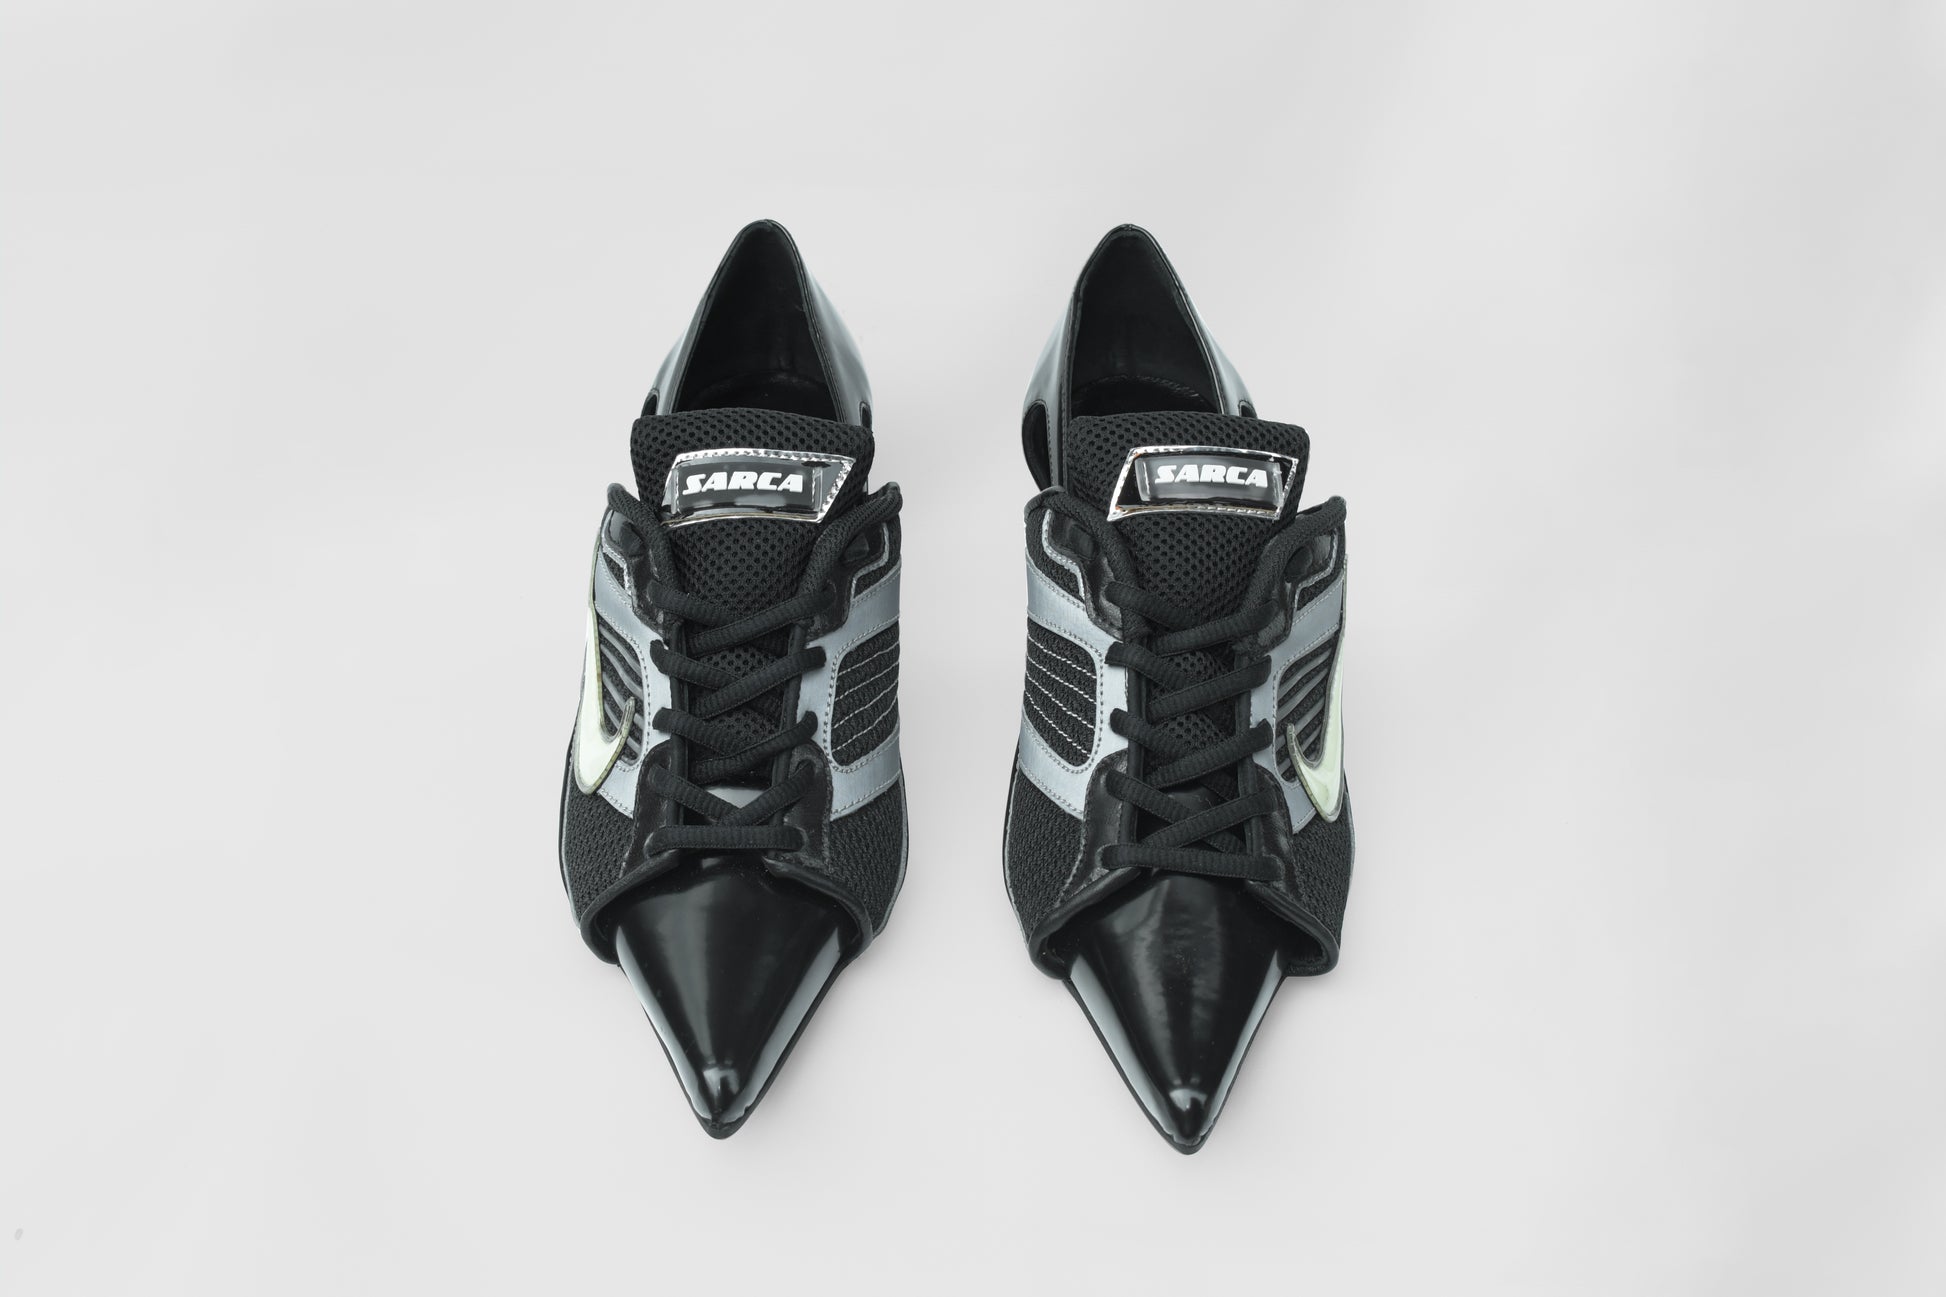 A photograph of the top view of Ancuta Sarca Lamborghini Heel Black shoes, 6CM HEEL, UPCYCLED TRAINER CLOSED BACK PUMPS, POINTY TOE, BLACK FAUX LEATHER